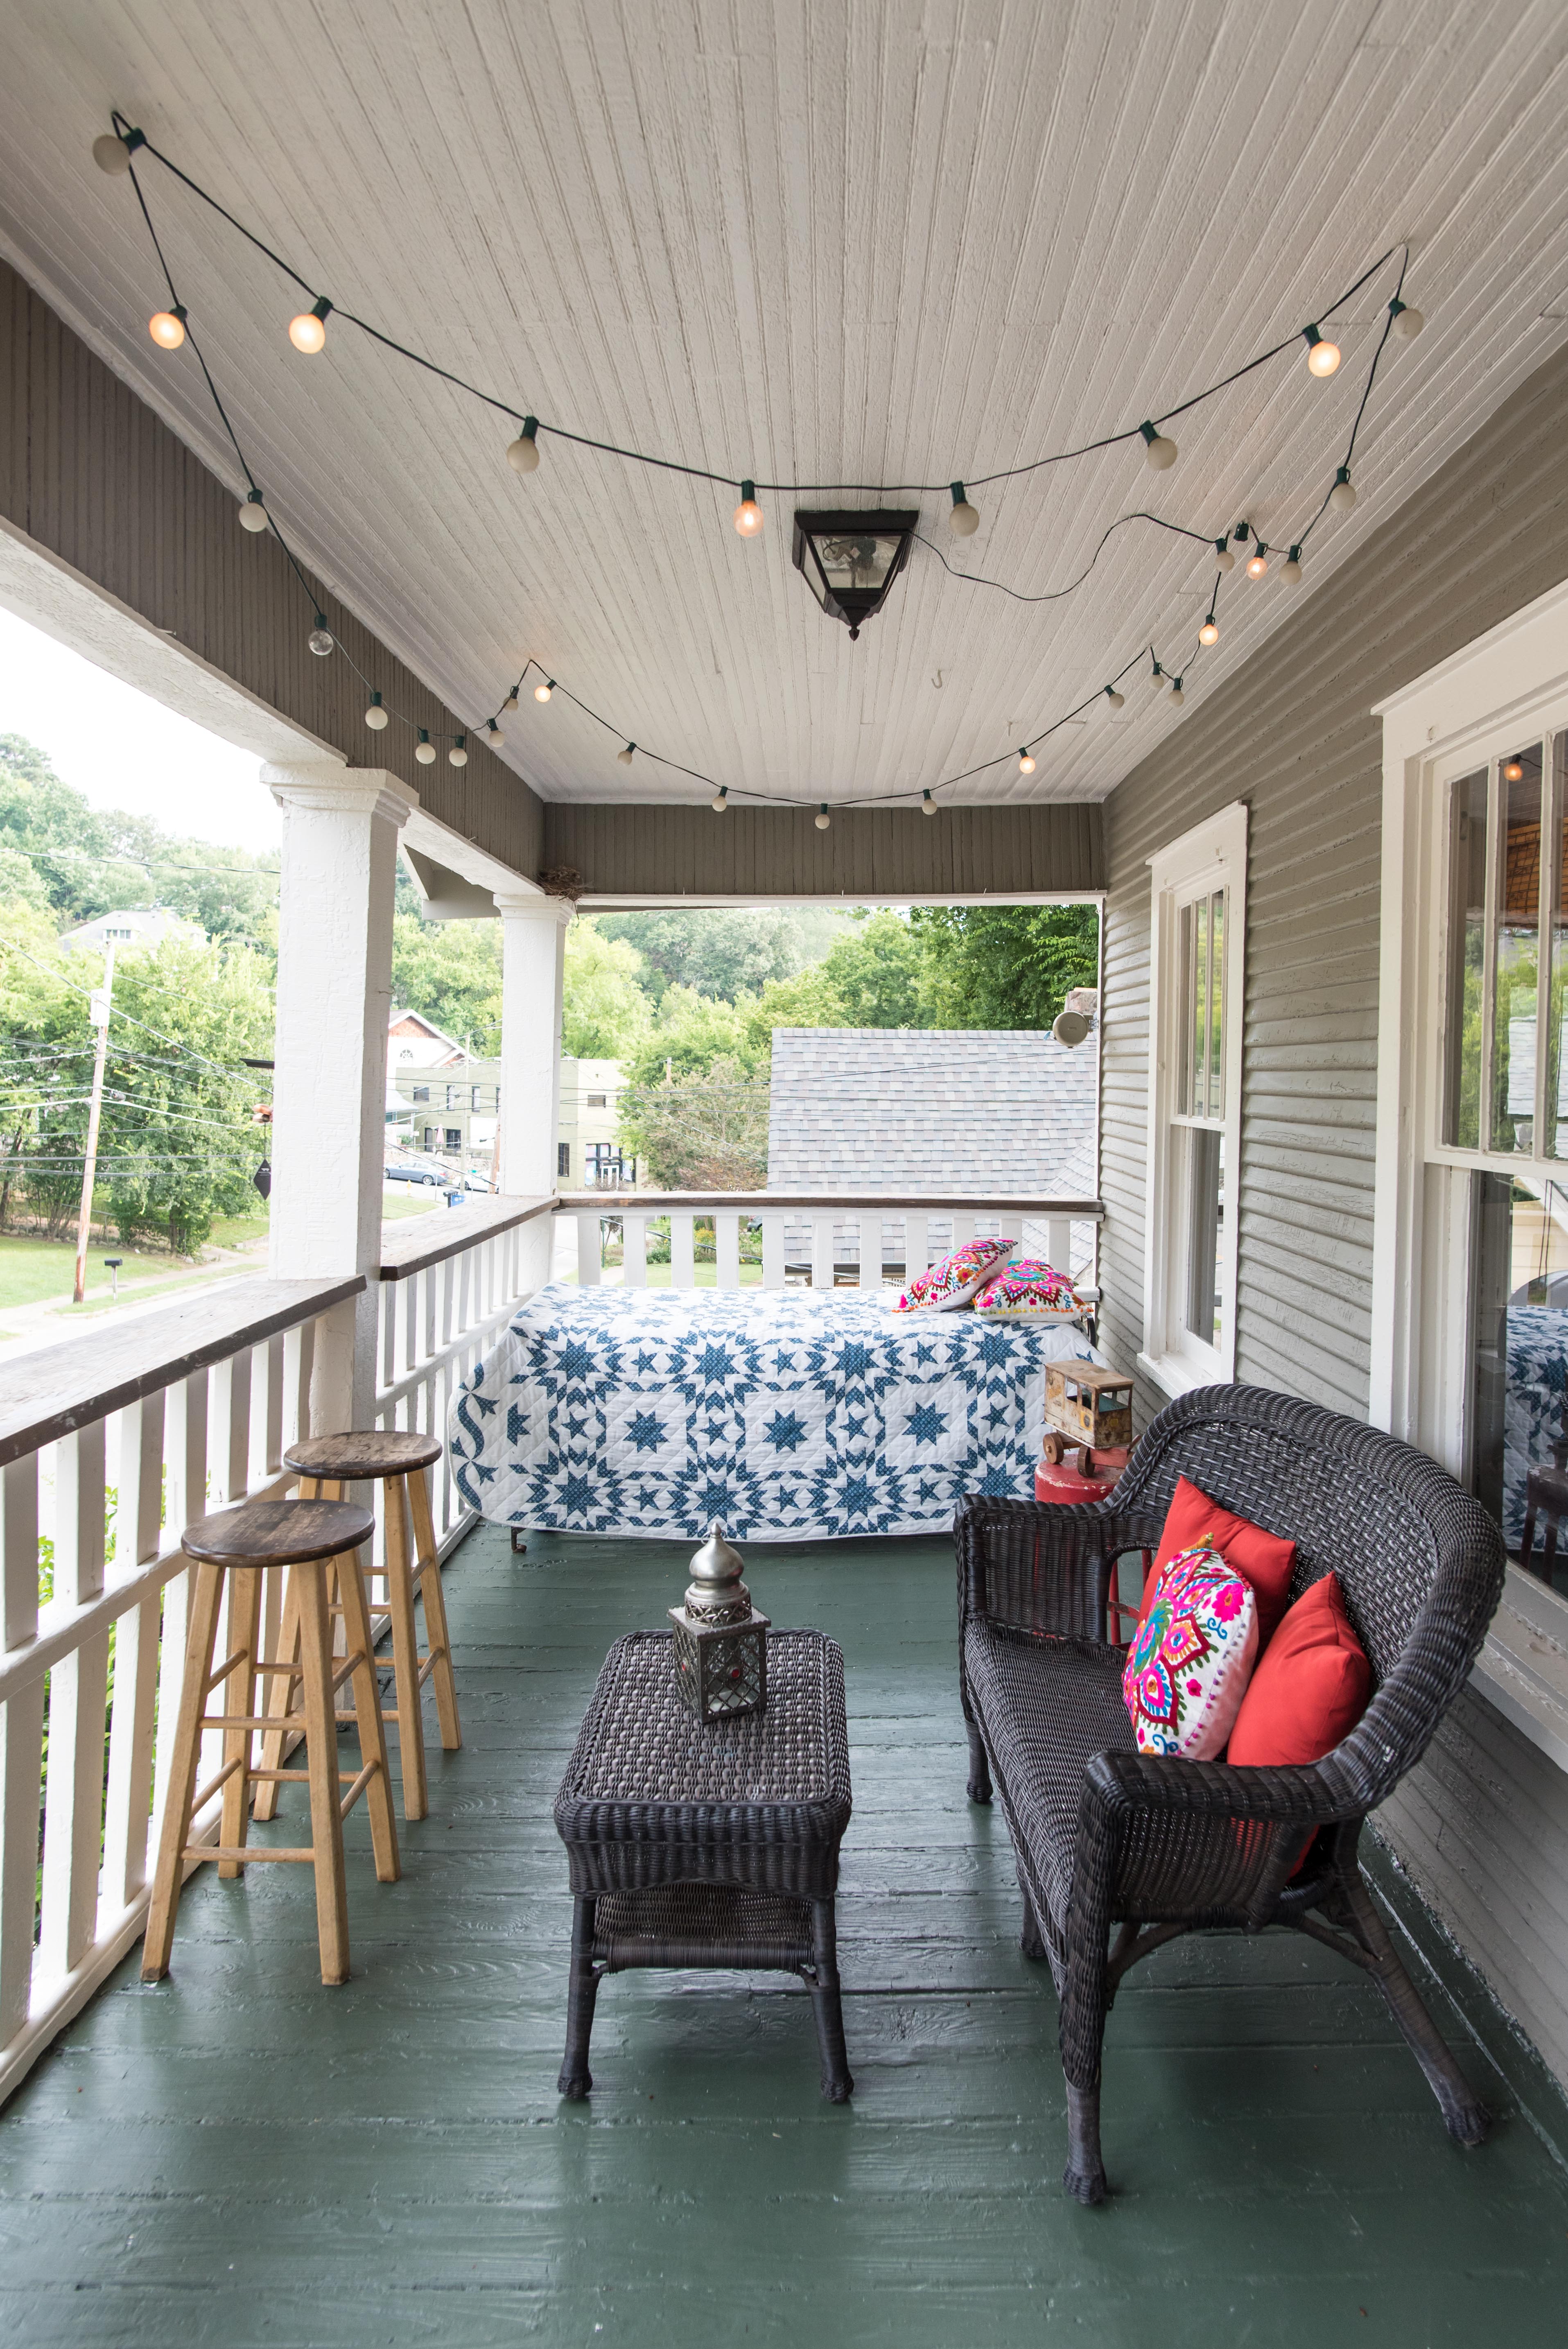 Tremont Treehouse Chattanooga Airbnb